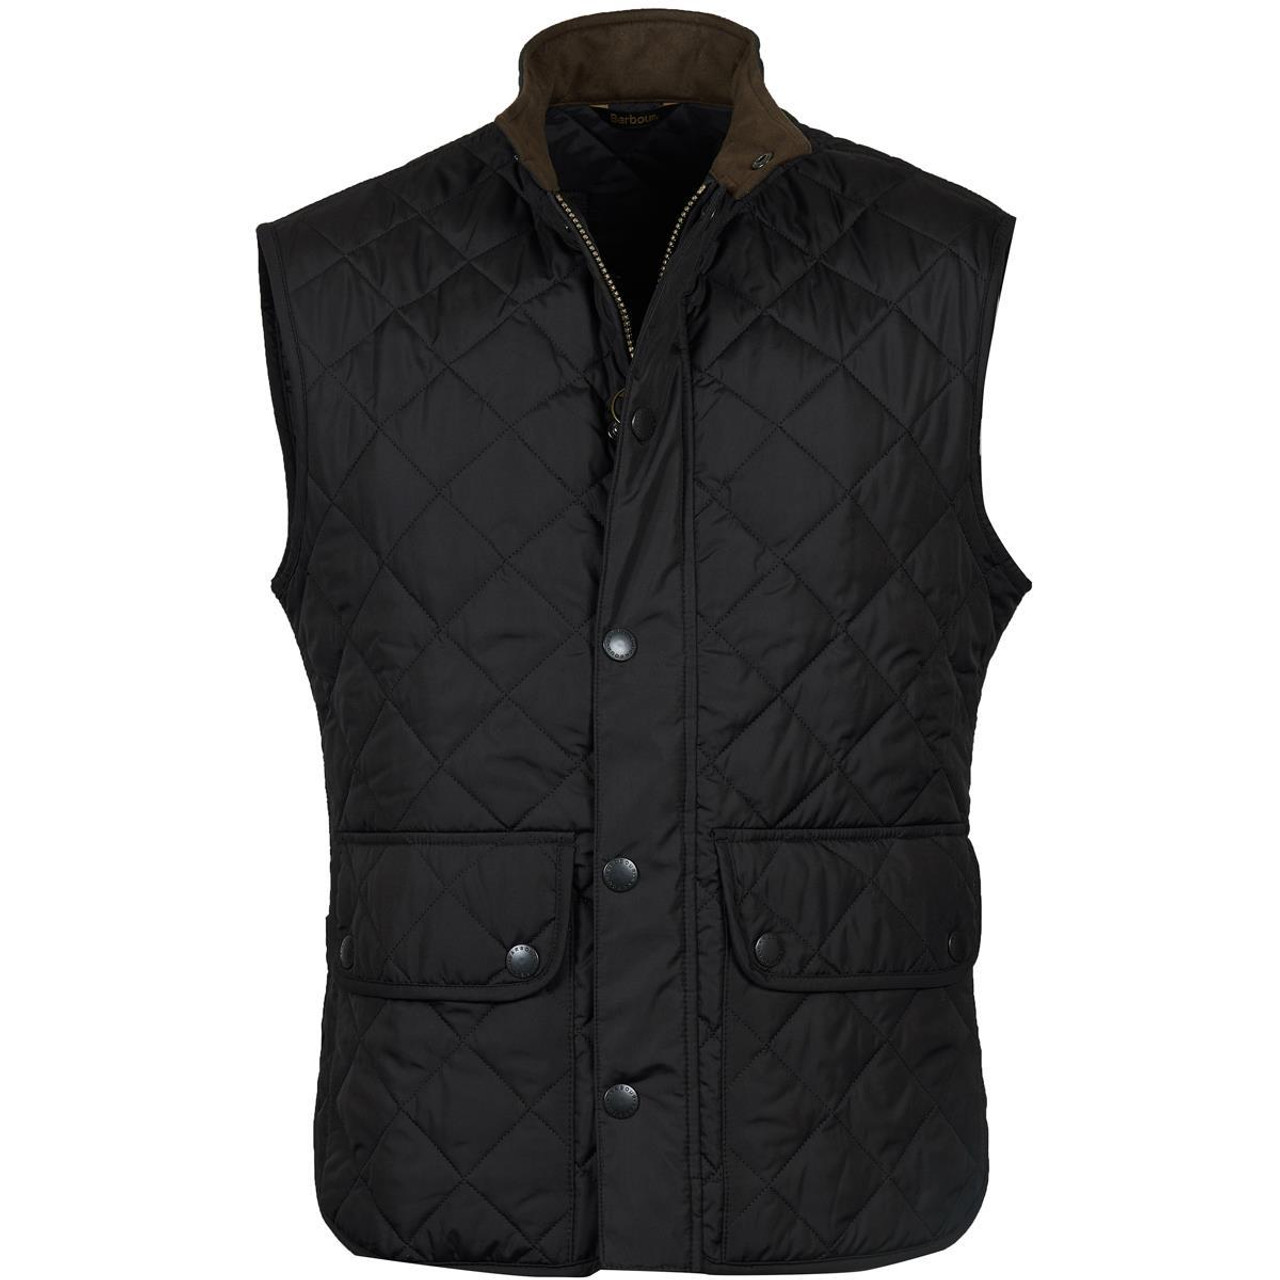 Is the Barbour Lowerdale Gilet suitable for winter wear?